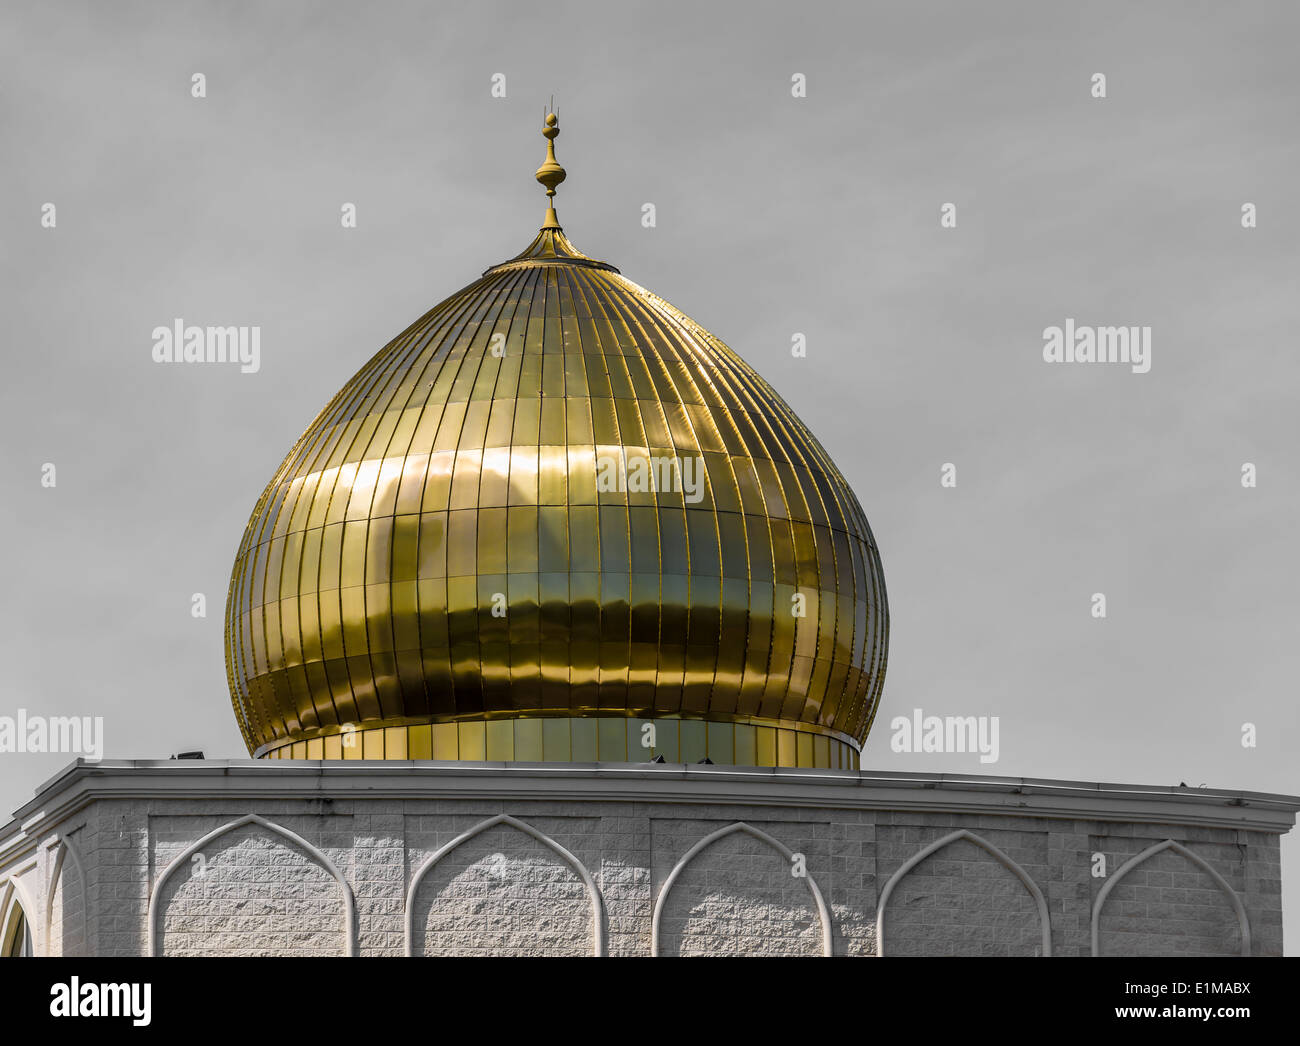 A gold dome on a temple outside on Toronto. Stock Photo